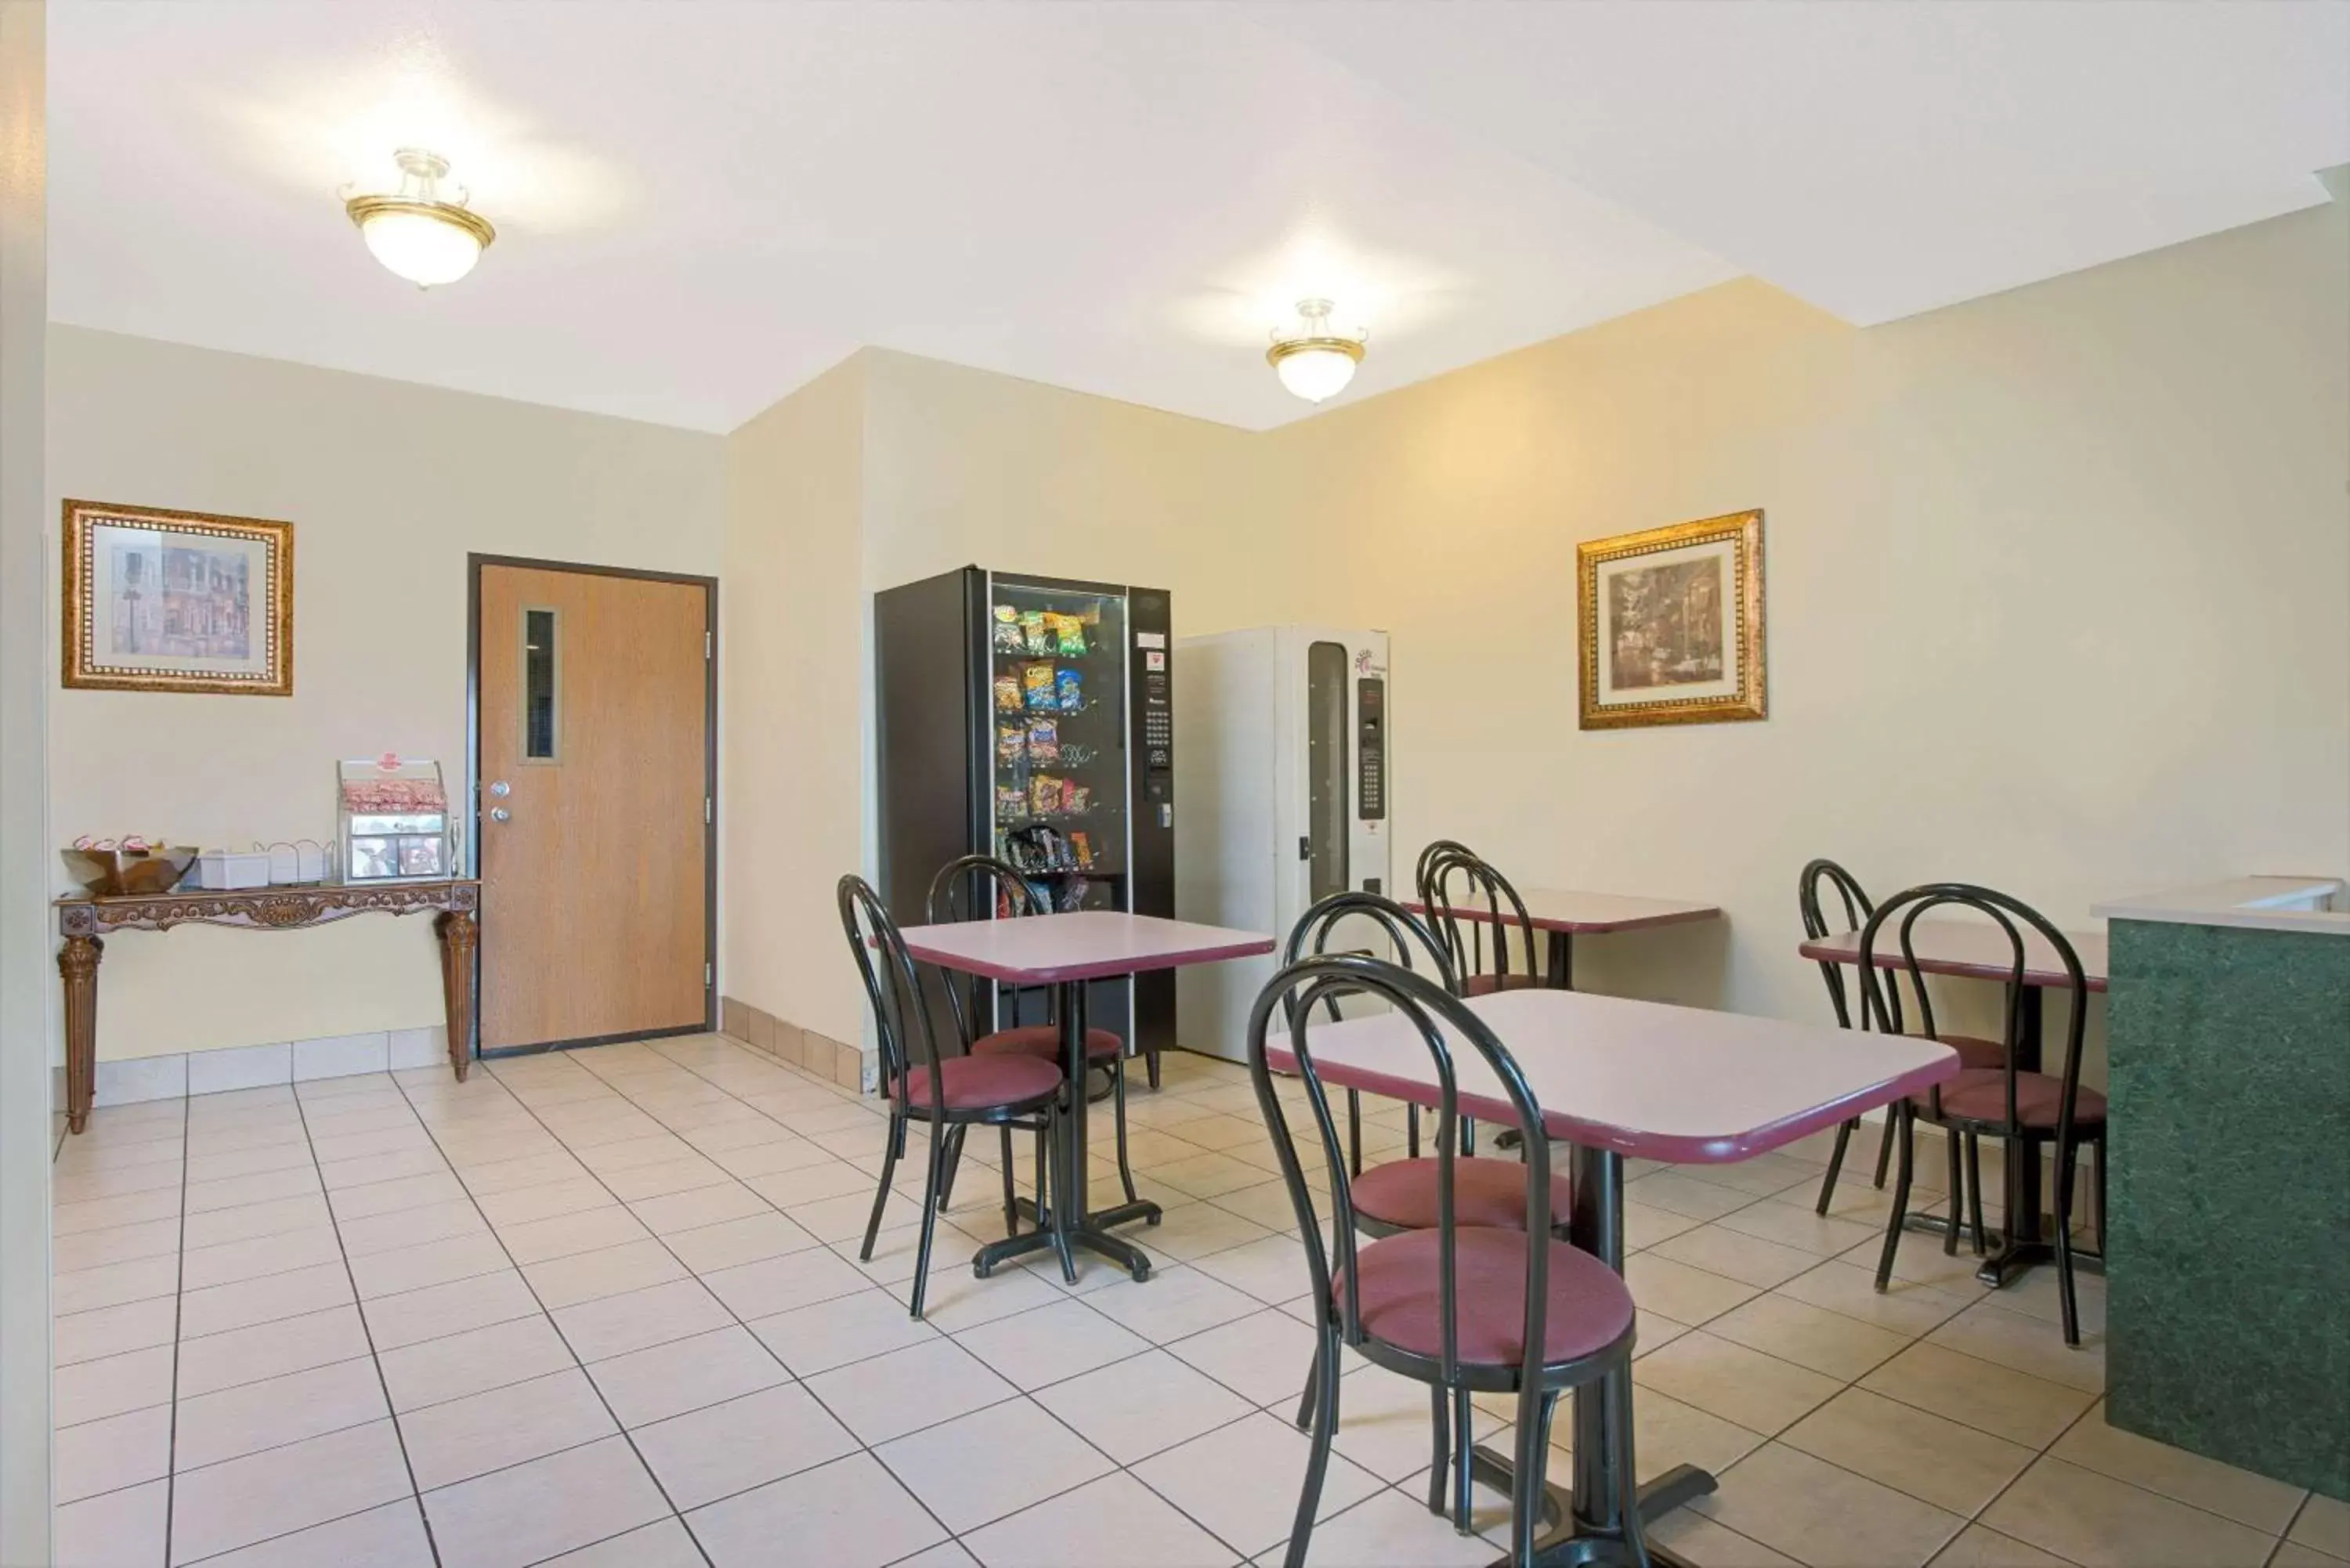 Restaurant/places to eat, Dining Area in Super 8 by Wyndham Bonne Terre